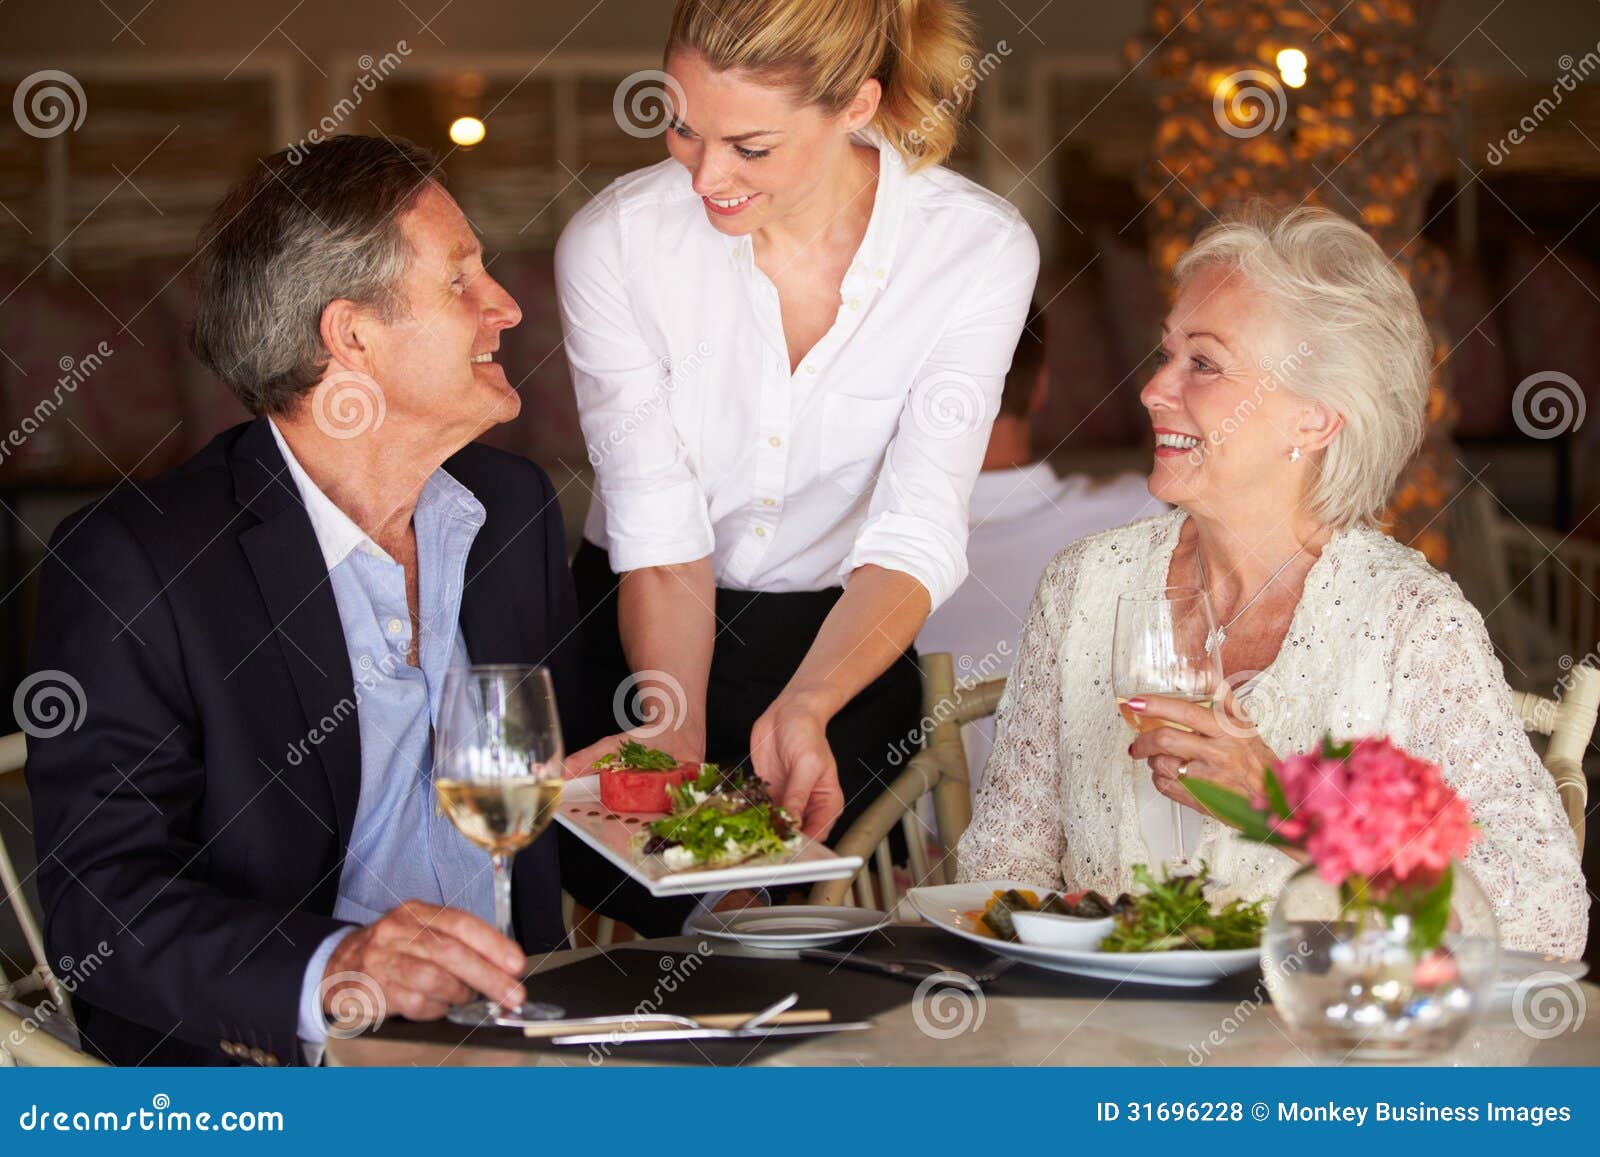 waitress serving food to senior couple in restaurant